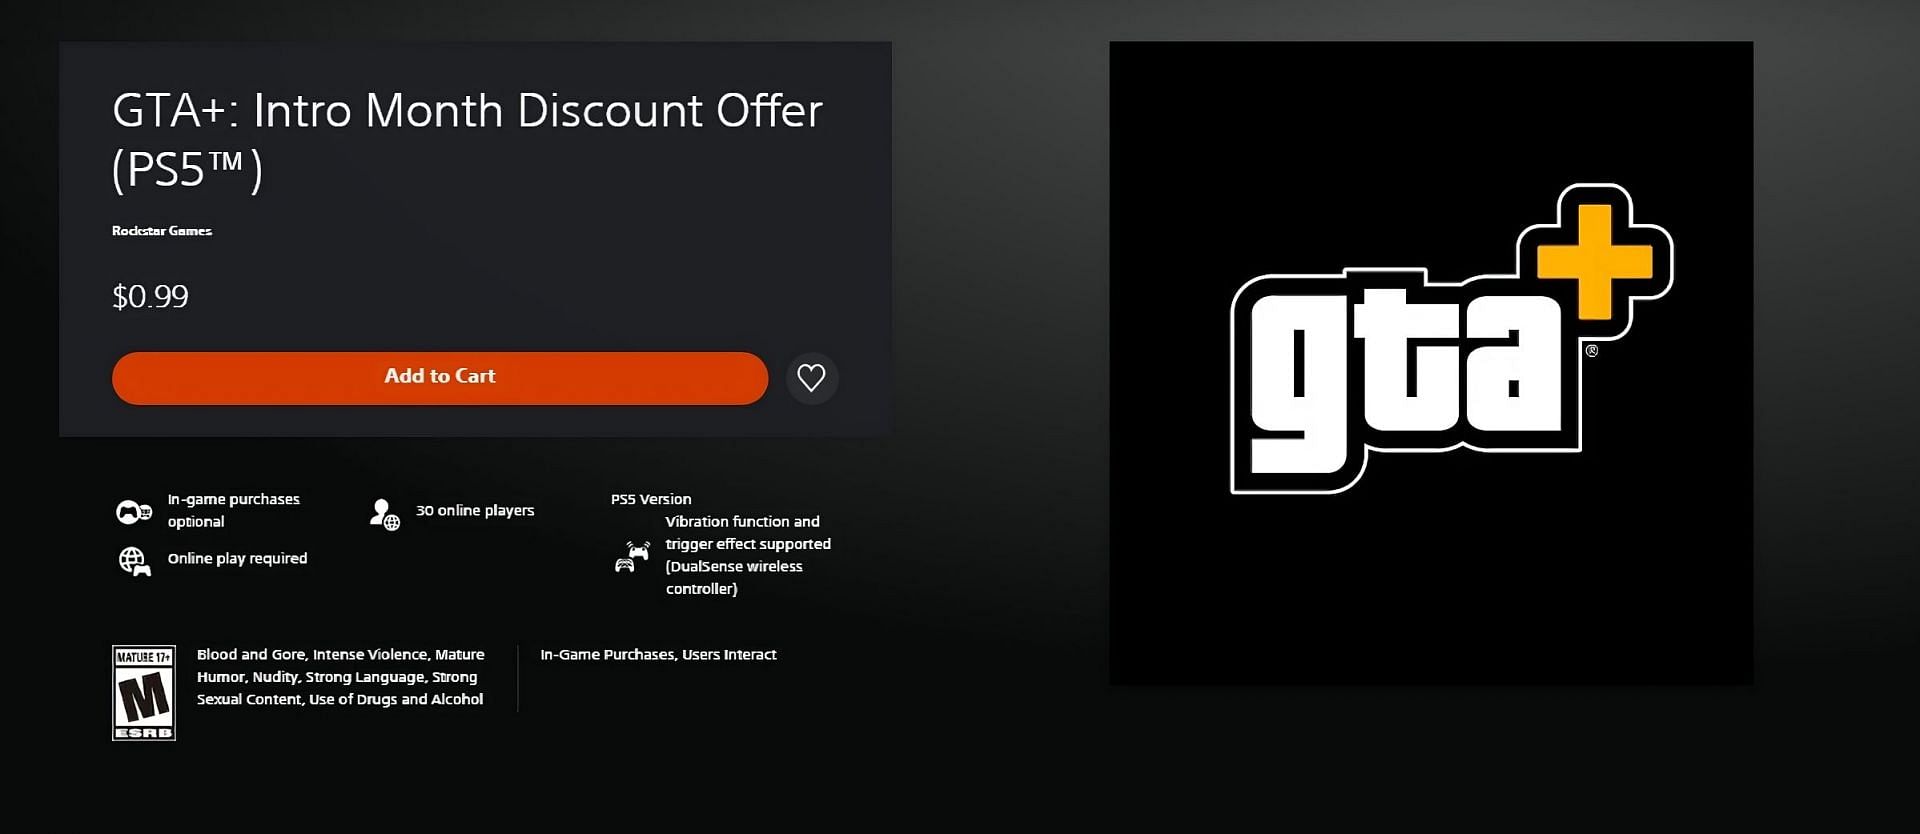 GTA + available on 80% discount for a limited time (image via store.playstation.com)